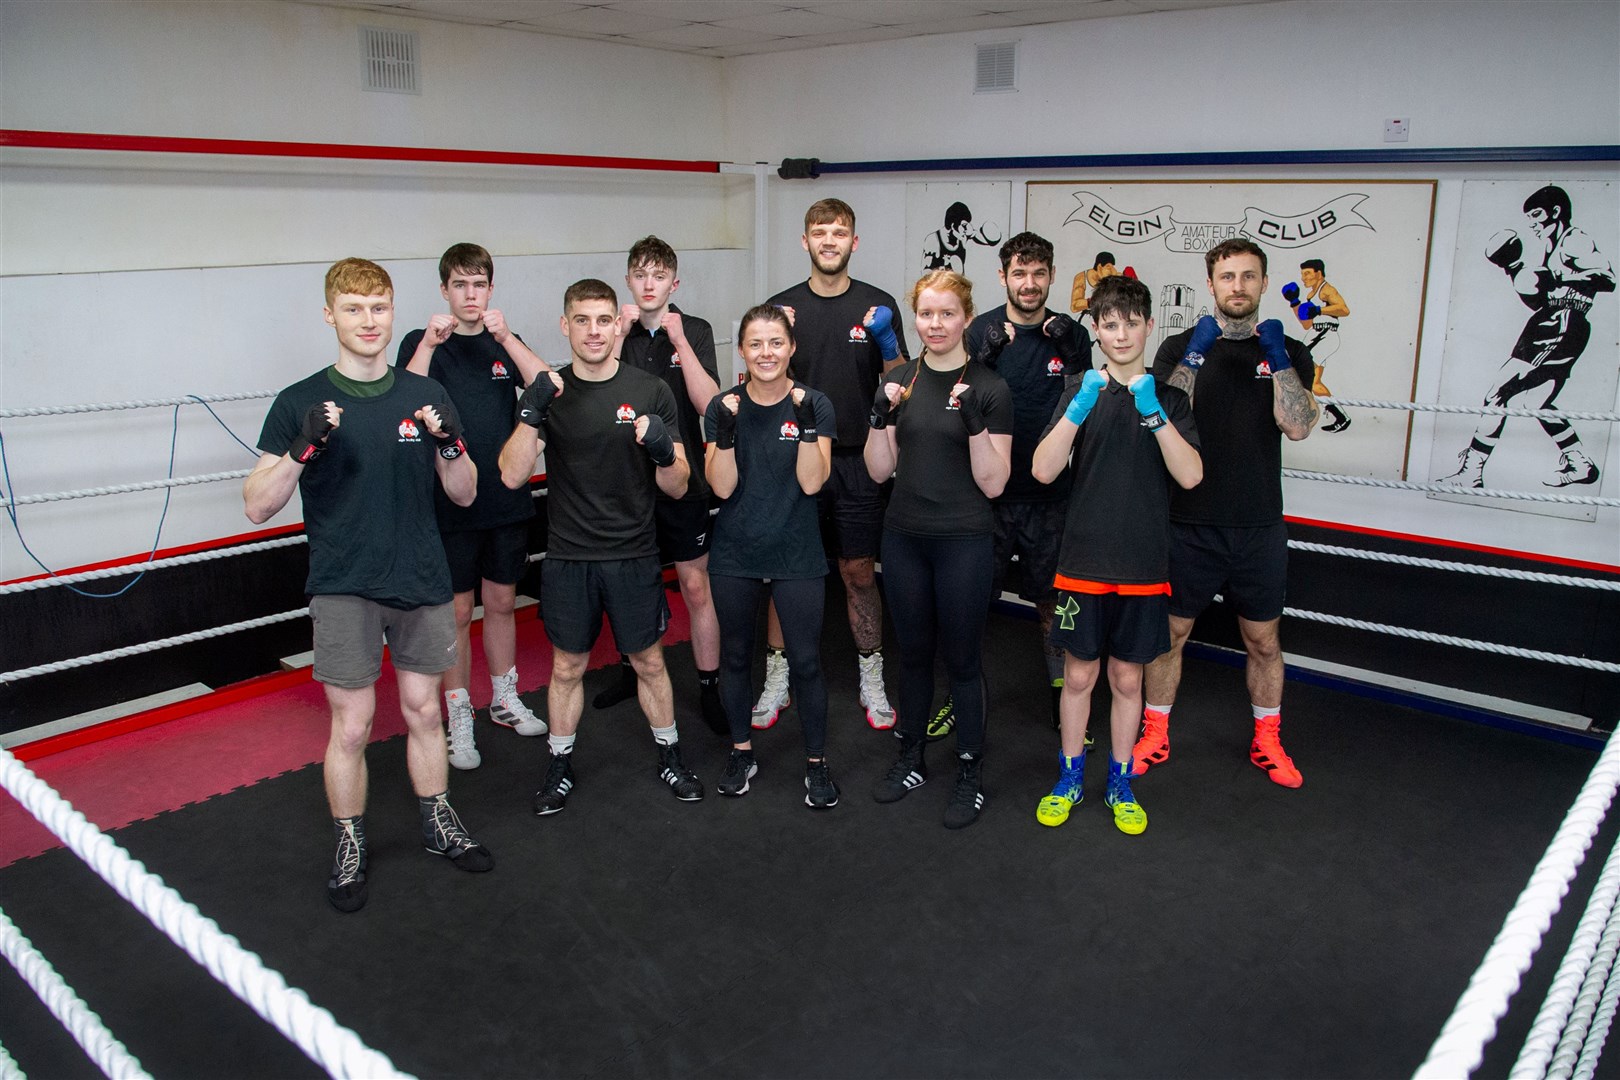 Ten Elgin Amateur Boxing Club fighters are competing at the Scottish Novice Championships over the next two weekends. Pictures, from left: Jacob Billingell, Zander Fleming, Andrew Forsyth, Liam Shiels, Josie Walls, Craig Mone, Faith Ross, David Grigor, Tyler Sked, Kyle Stewart. Picture: Daniel Forsyth